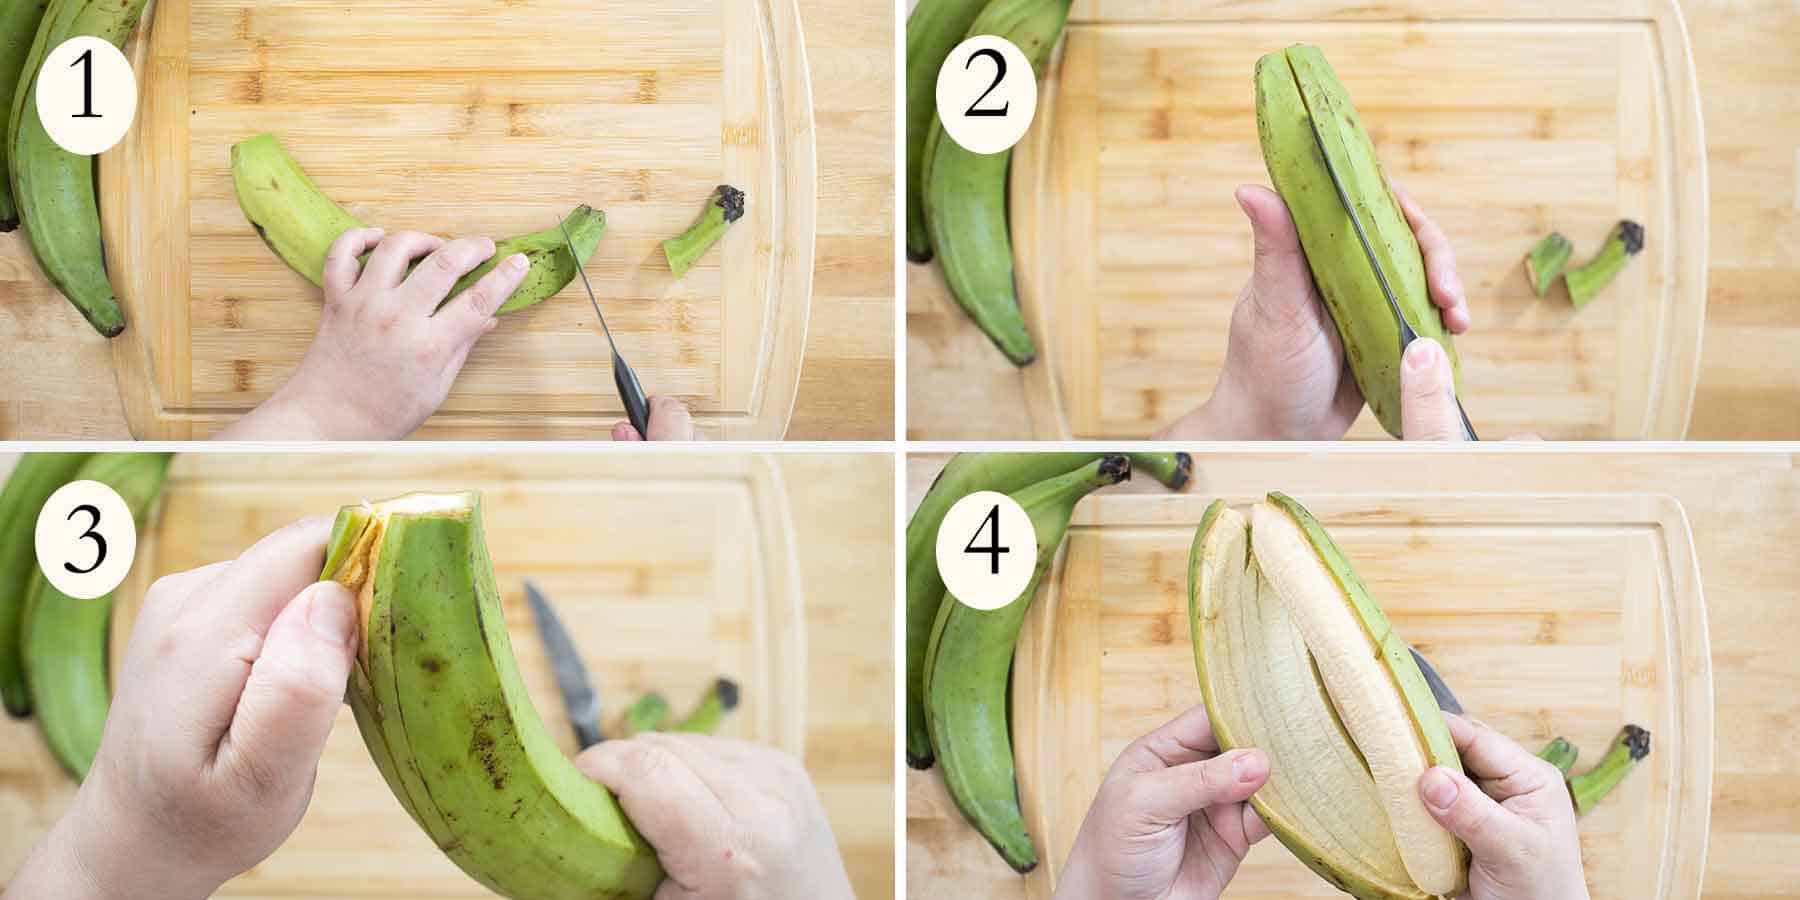 steps 1-4 on how to peel plantains green.